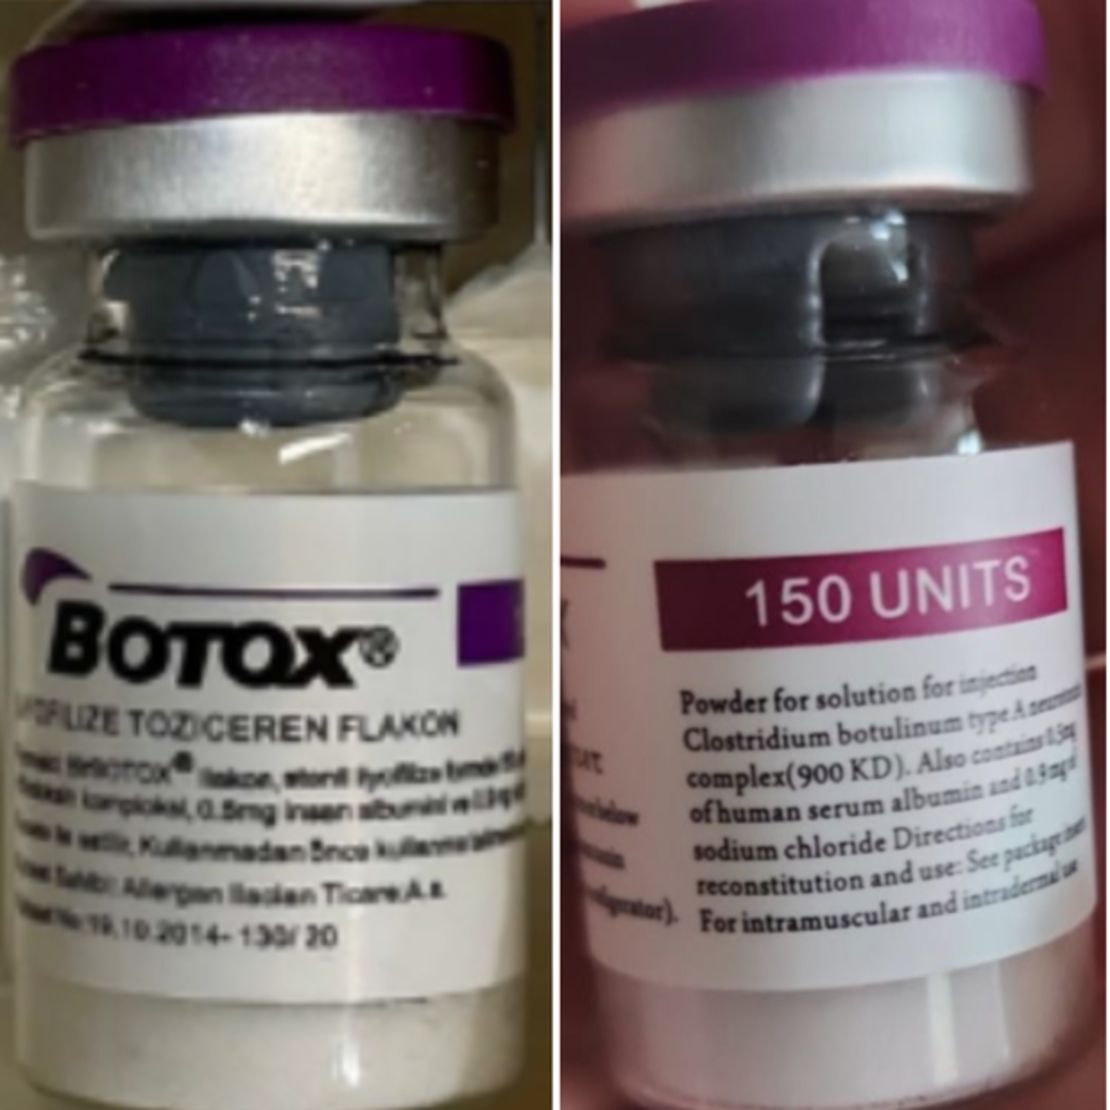 Counterfeit Botox cartons and vials may indicate 150-unit doses, which is not a unit made by the companies AbbVie or Allergan, the FDA said.